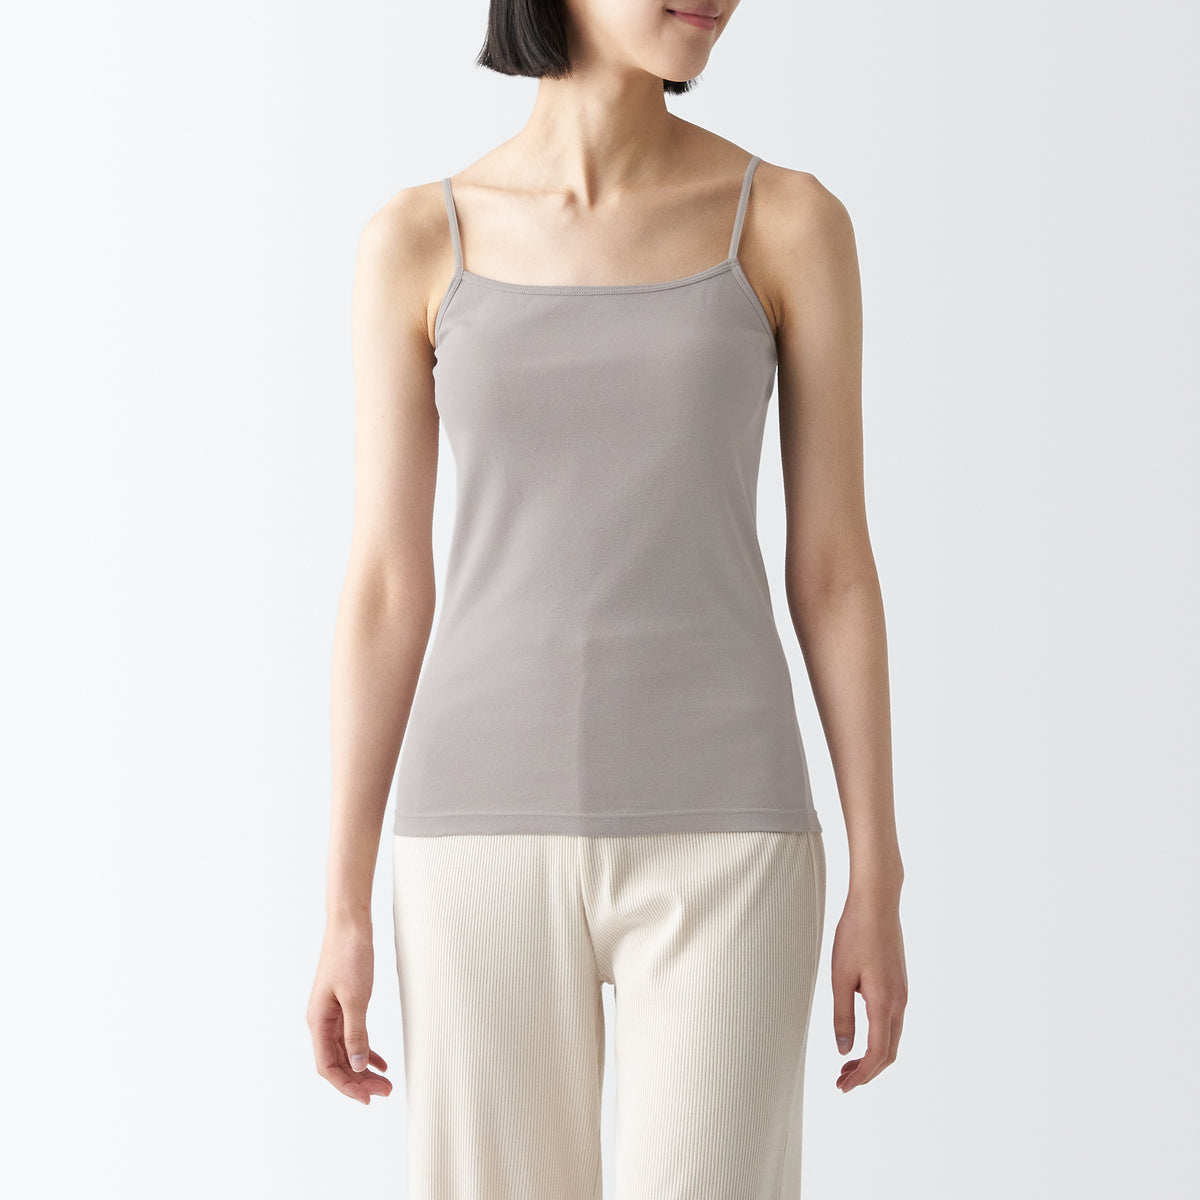 Camisole Cotton, IFG Camisole